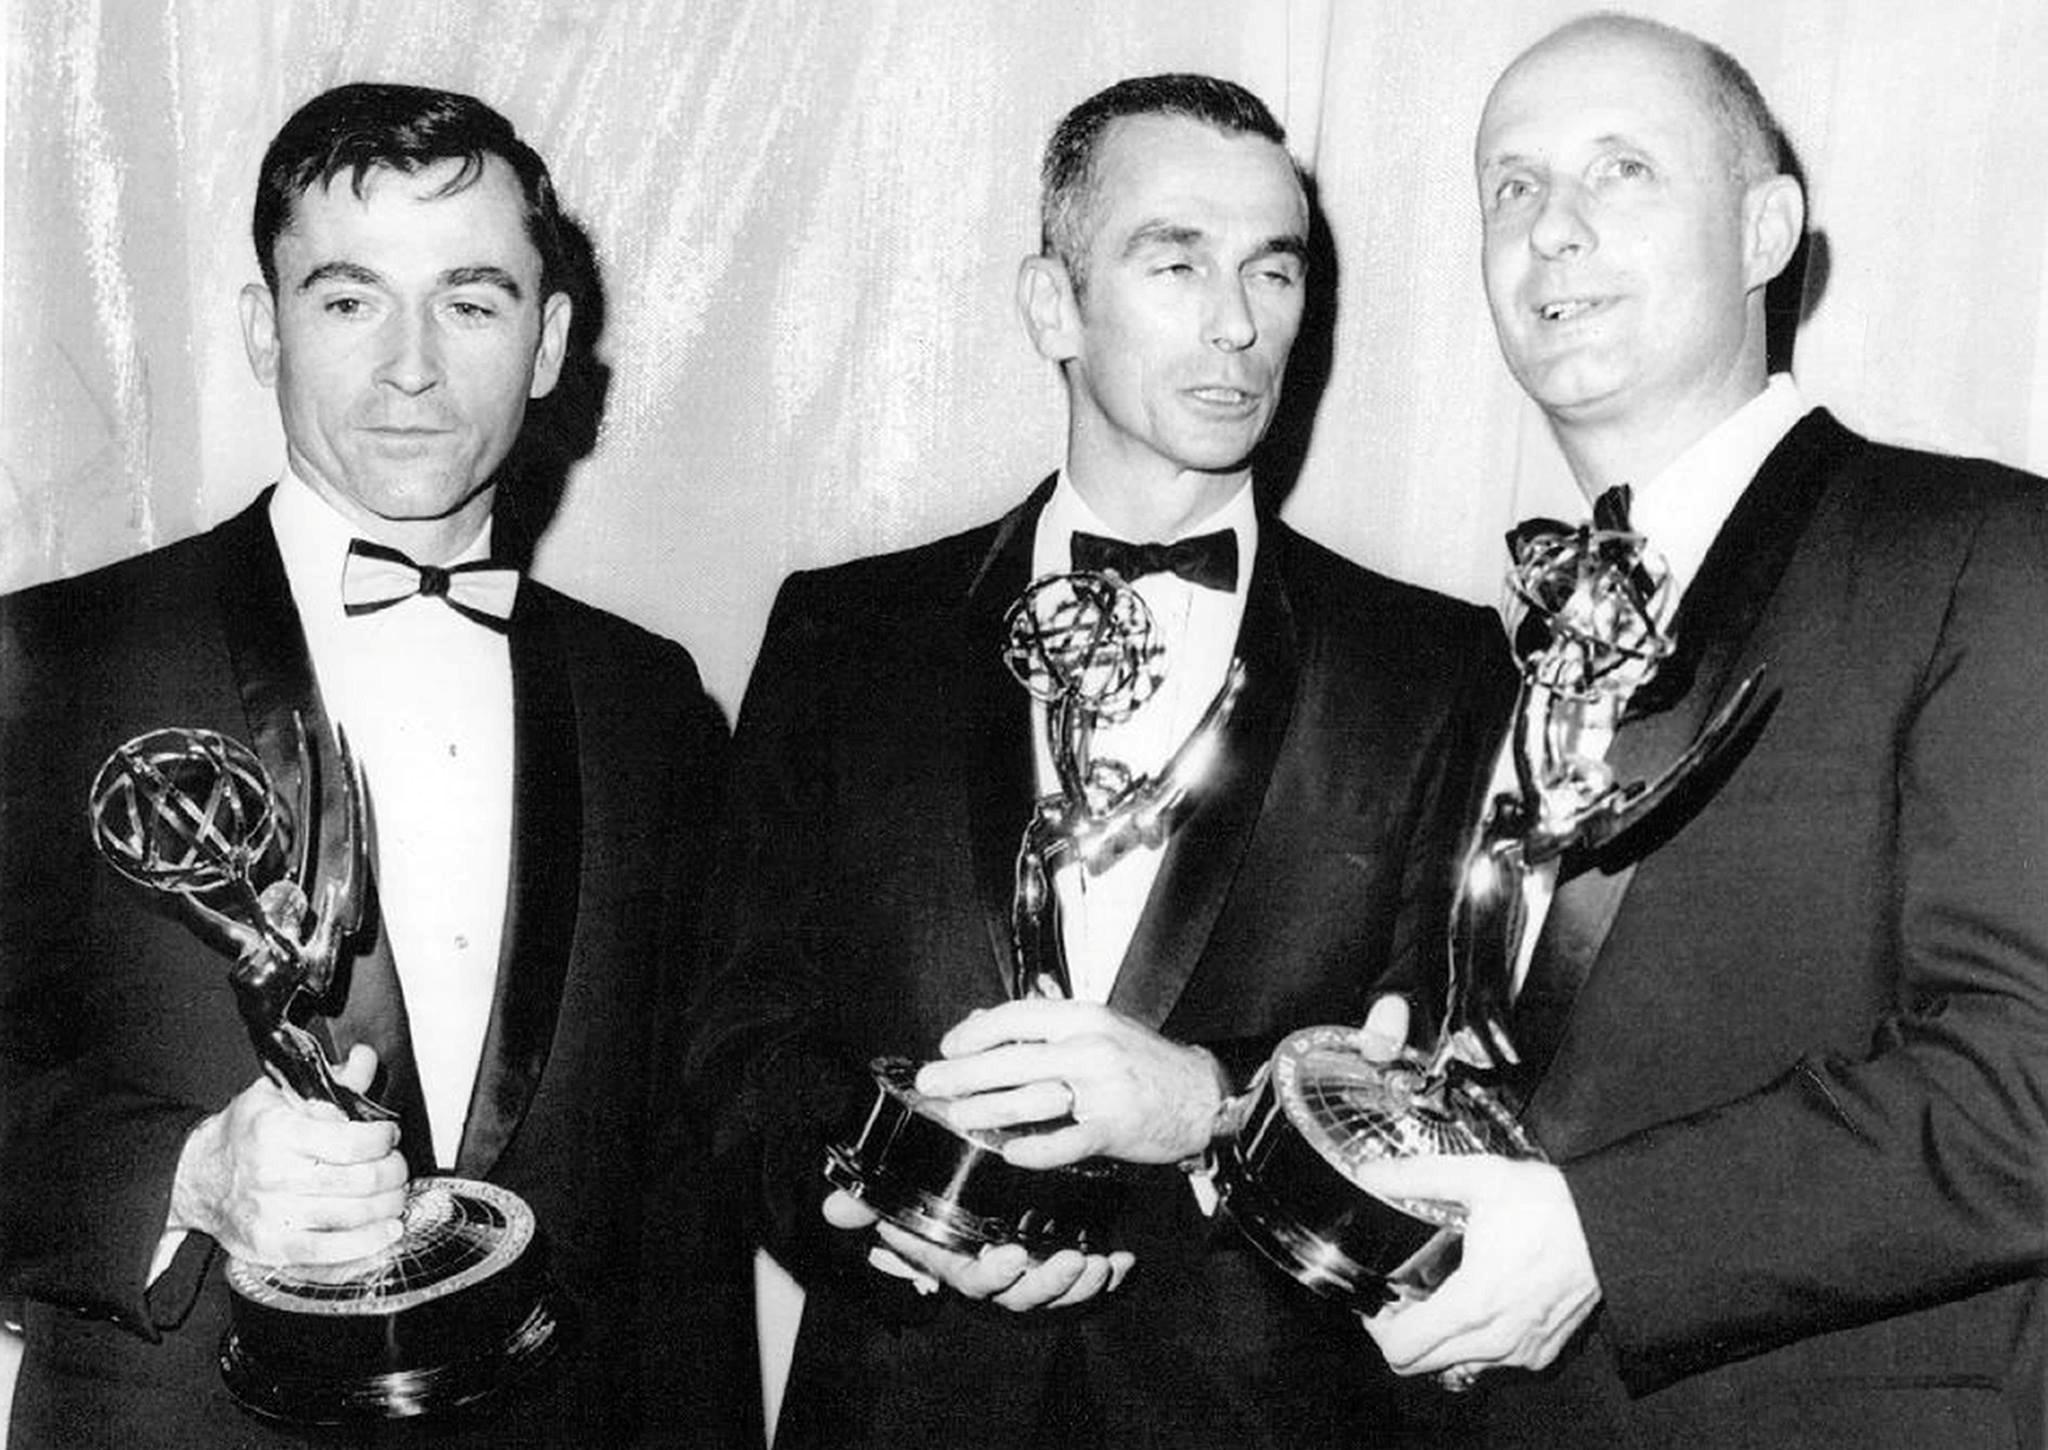 Apollo 10 astronauts John W. Young, left, Eugene A. Cernan, and Thomas P. Stafford hold their Emmy Awards